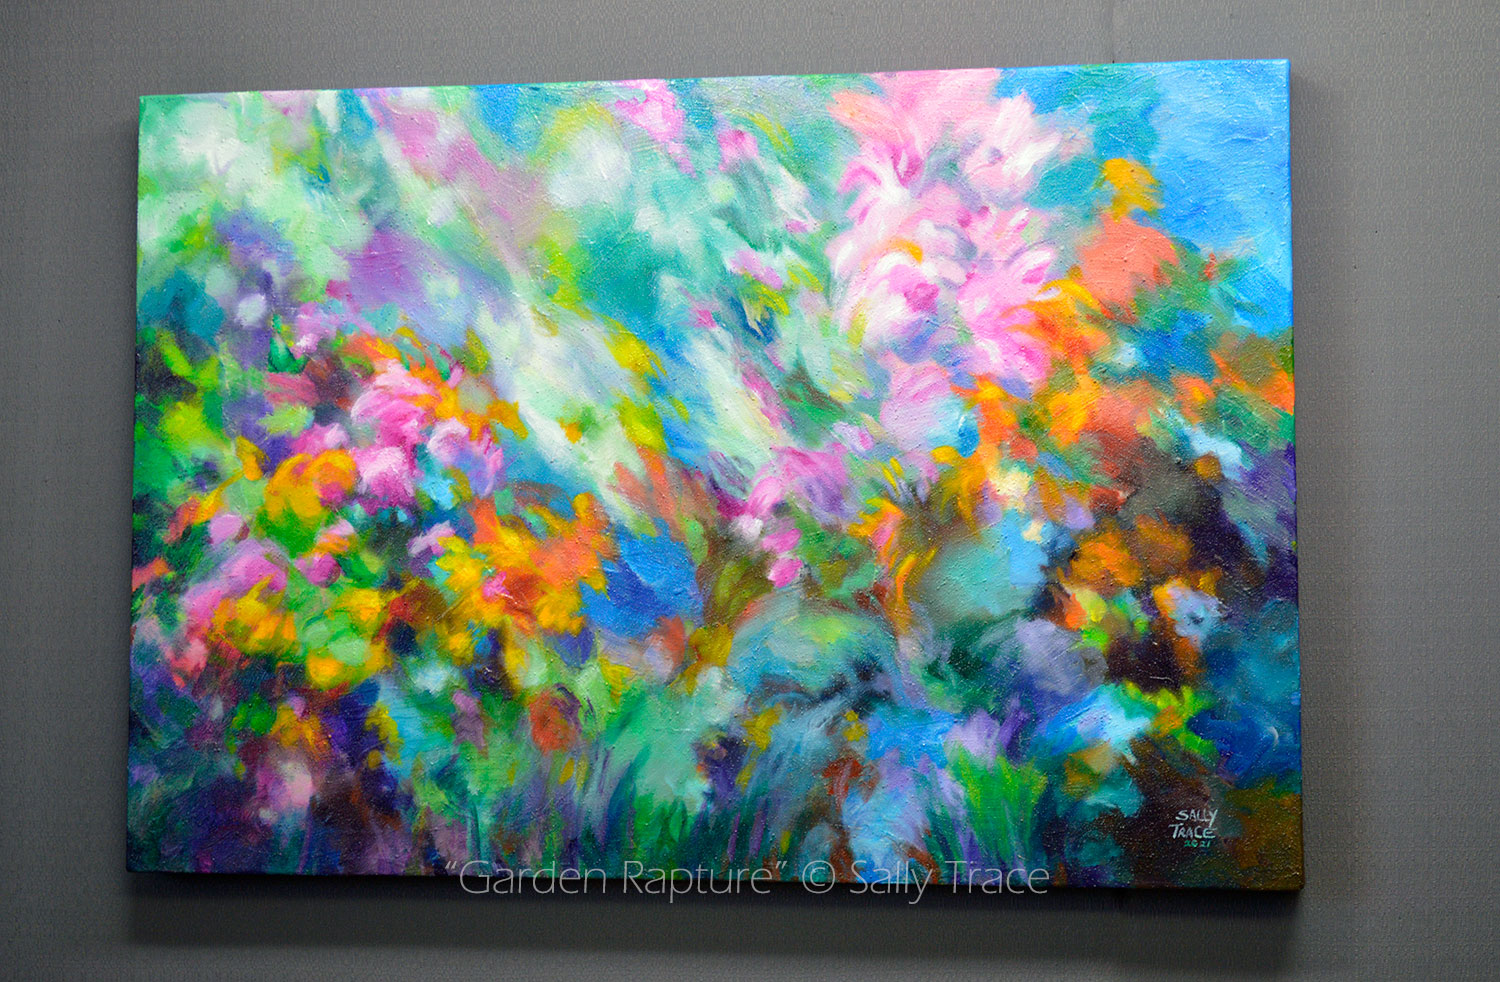 Abstract mixed media textured impasto painting "Garden Rapture" 24x36 inches, 1.5 inches deep with a very textured surface.  Original abstract art for sale.  I was really enjoying the late summer blossoms this year, and the feeling made it's way into this painting.  Filled with beautiful, colorful summer floral blossoms. 